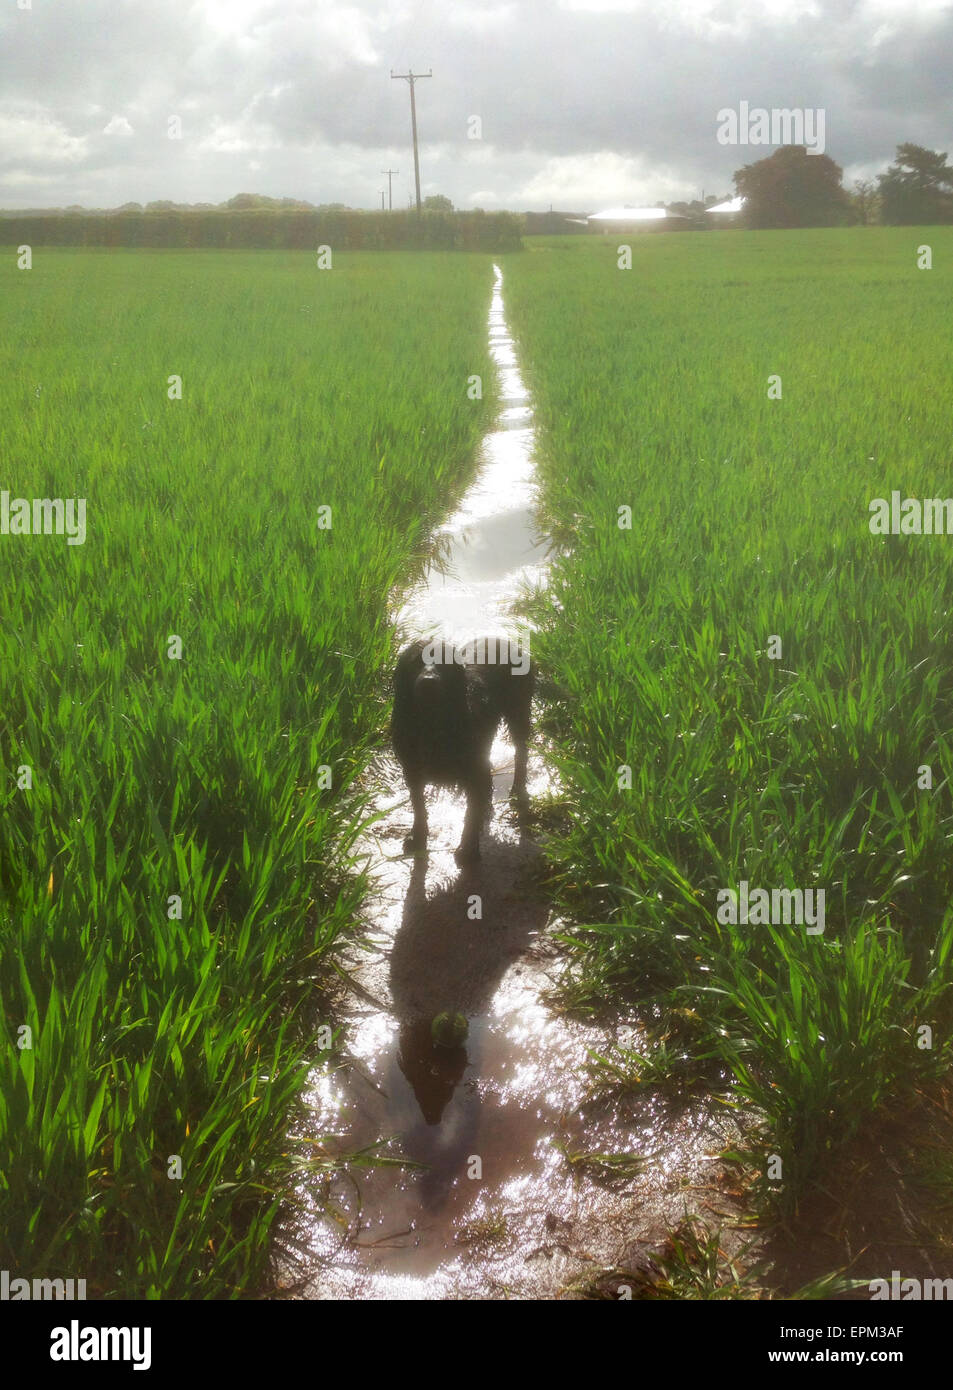 Knutsford, Cheshire, UK. 19th May, 2015. UK Weather. Wet dog walking in the village of Rostherne, Knutsford, Cheshire, UK today, as this wheat field resembles a paddy field after today's torrential downpours. Credit: Howard Barlow/Alamy Live News Stock Photo